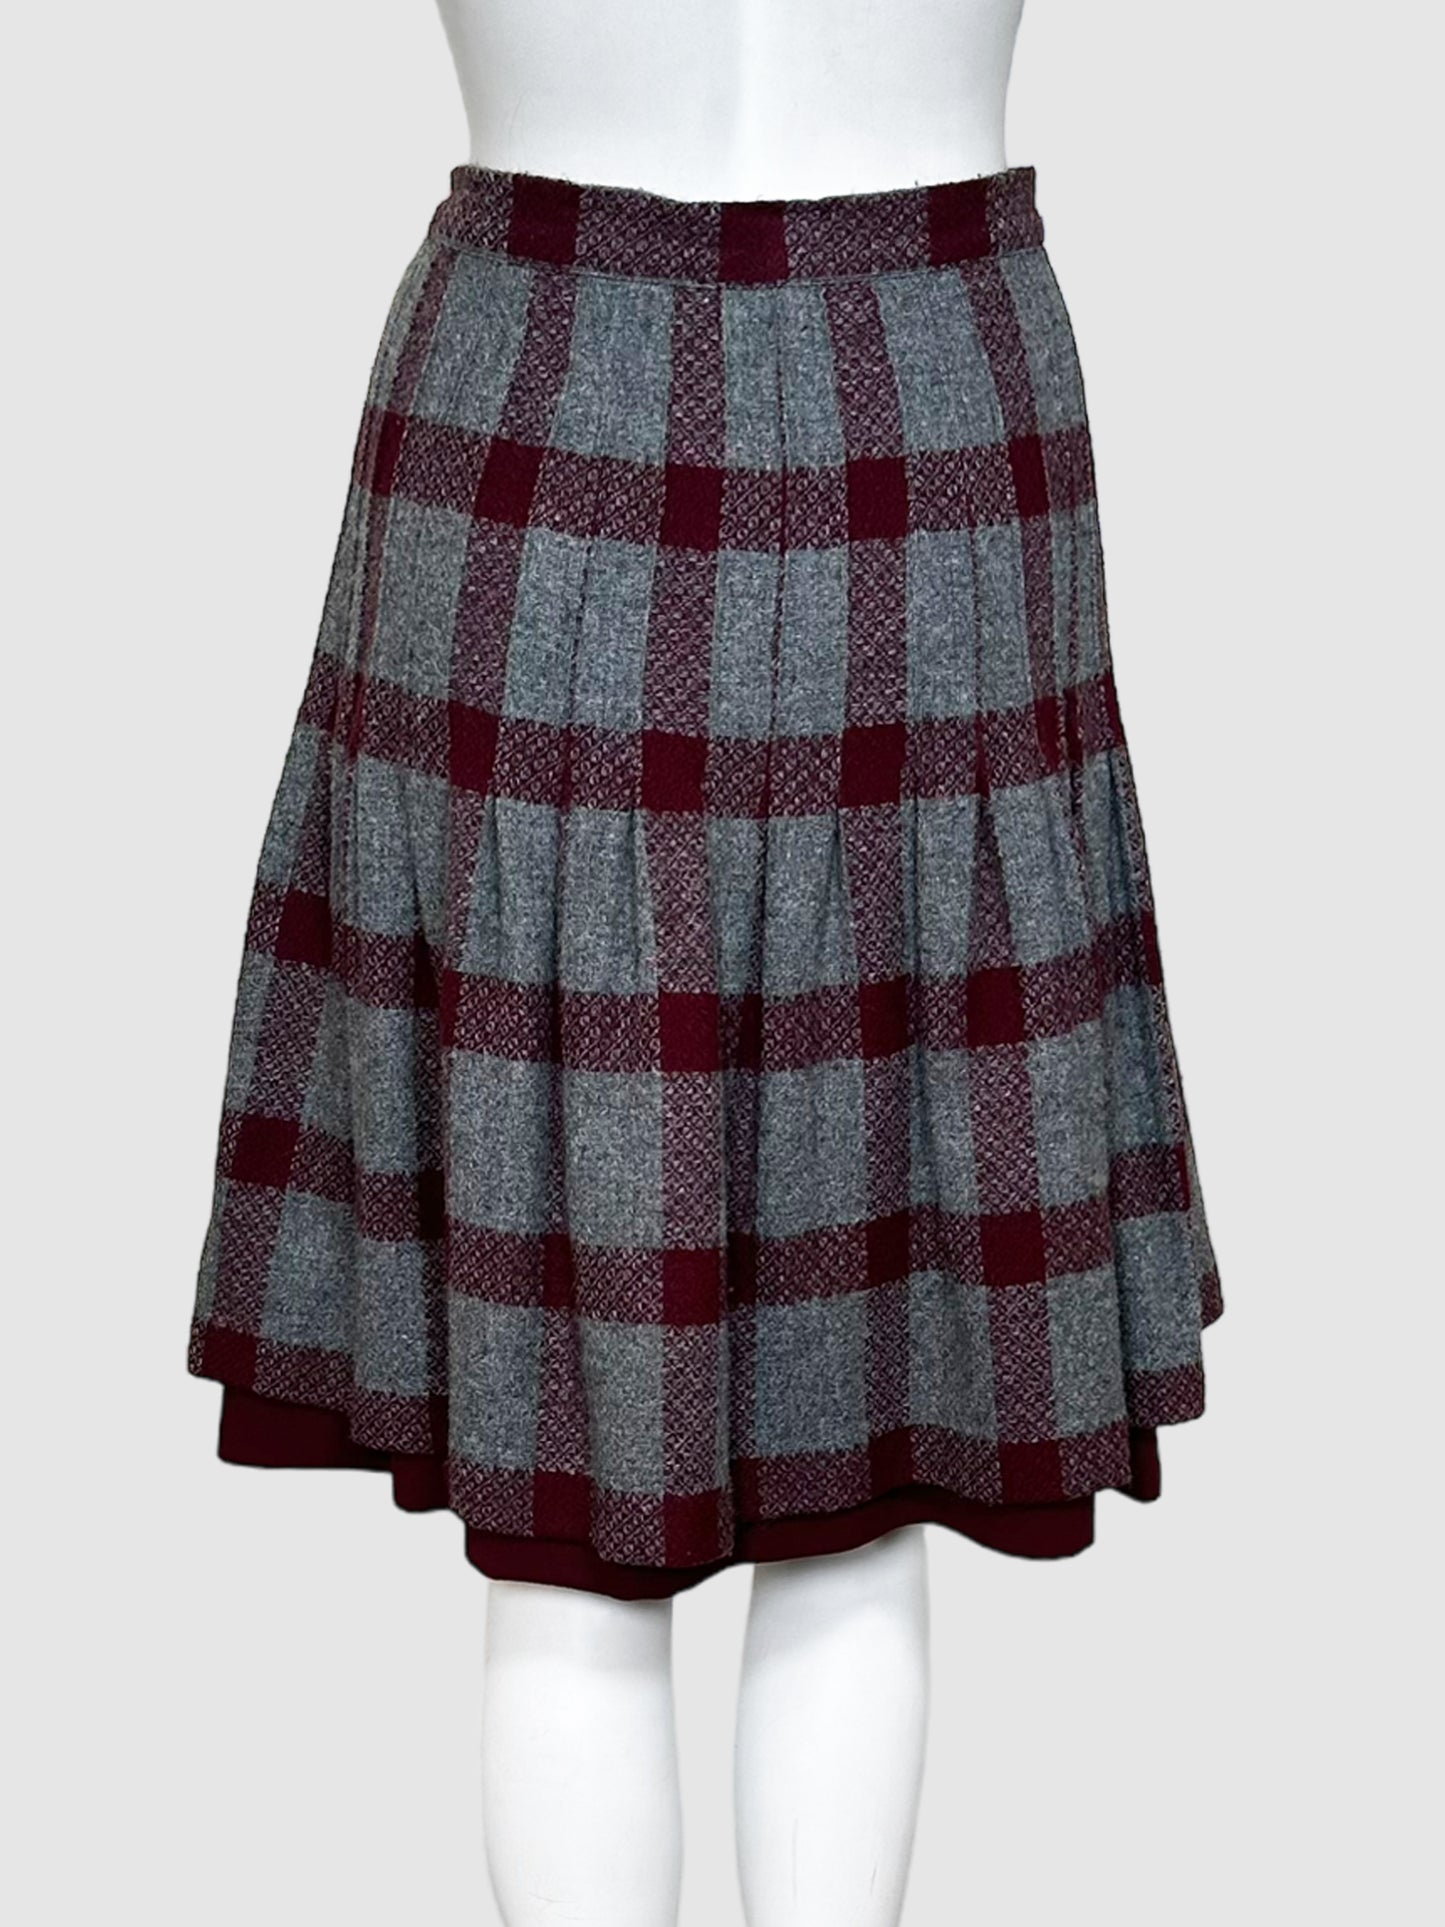 Valentino Boutique Plaid Pleated Skirt - Size 10